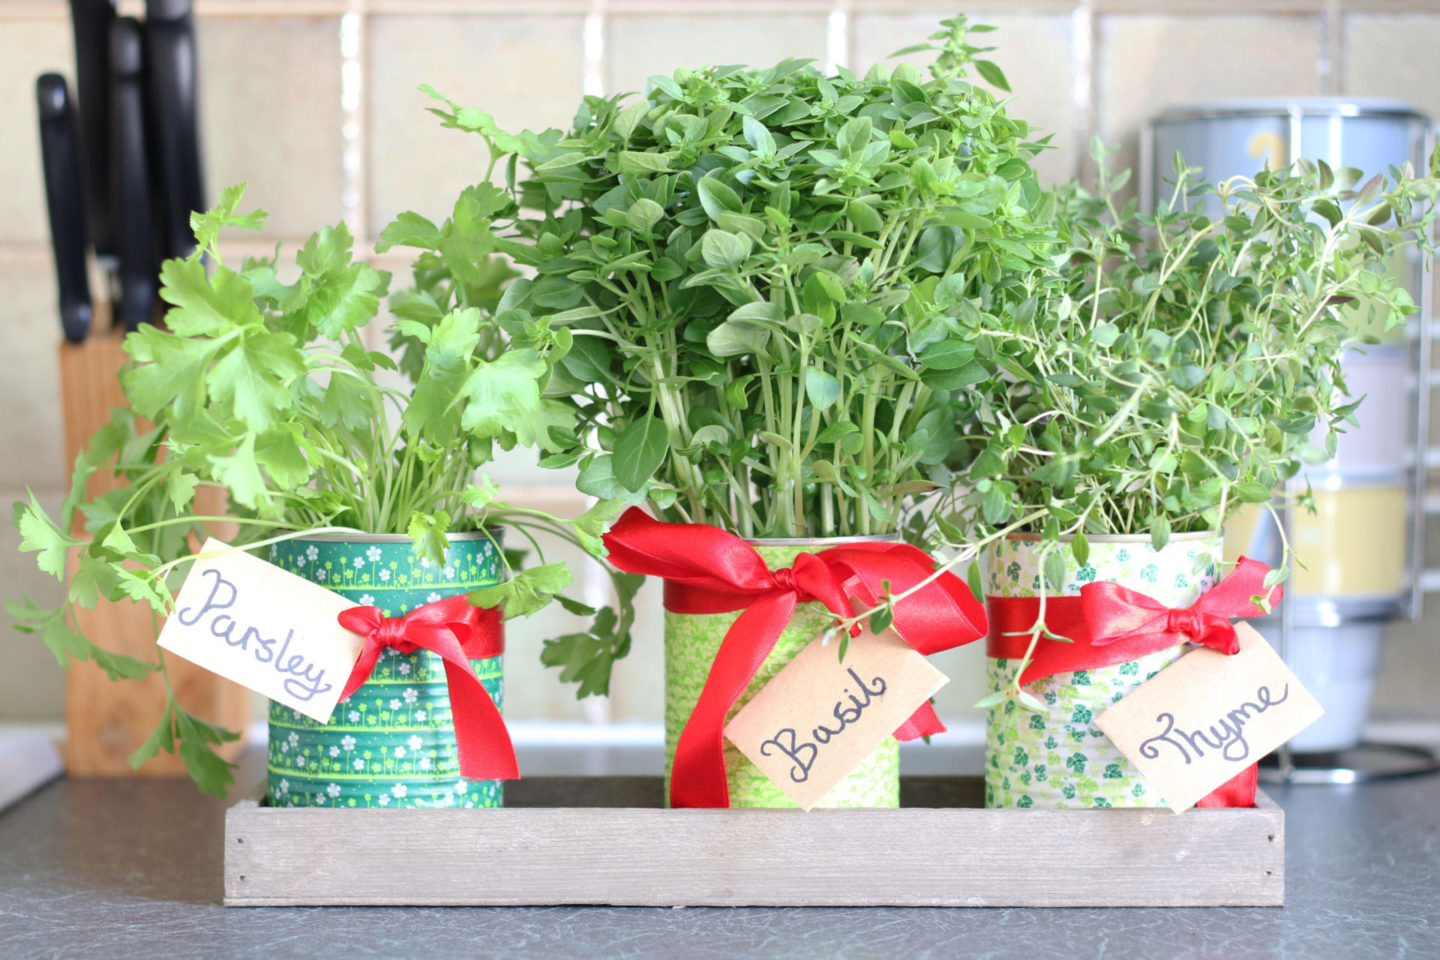 Herb Pot DIY - 3 Simple Upcycling Projects for British Flower Week. From Metal Cans to Herb Garden